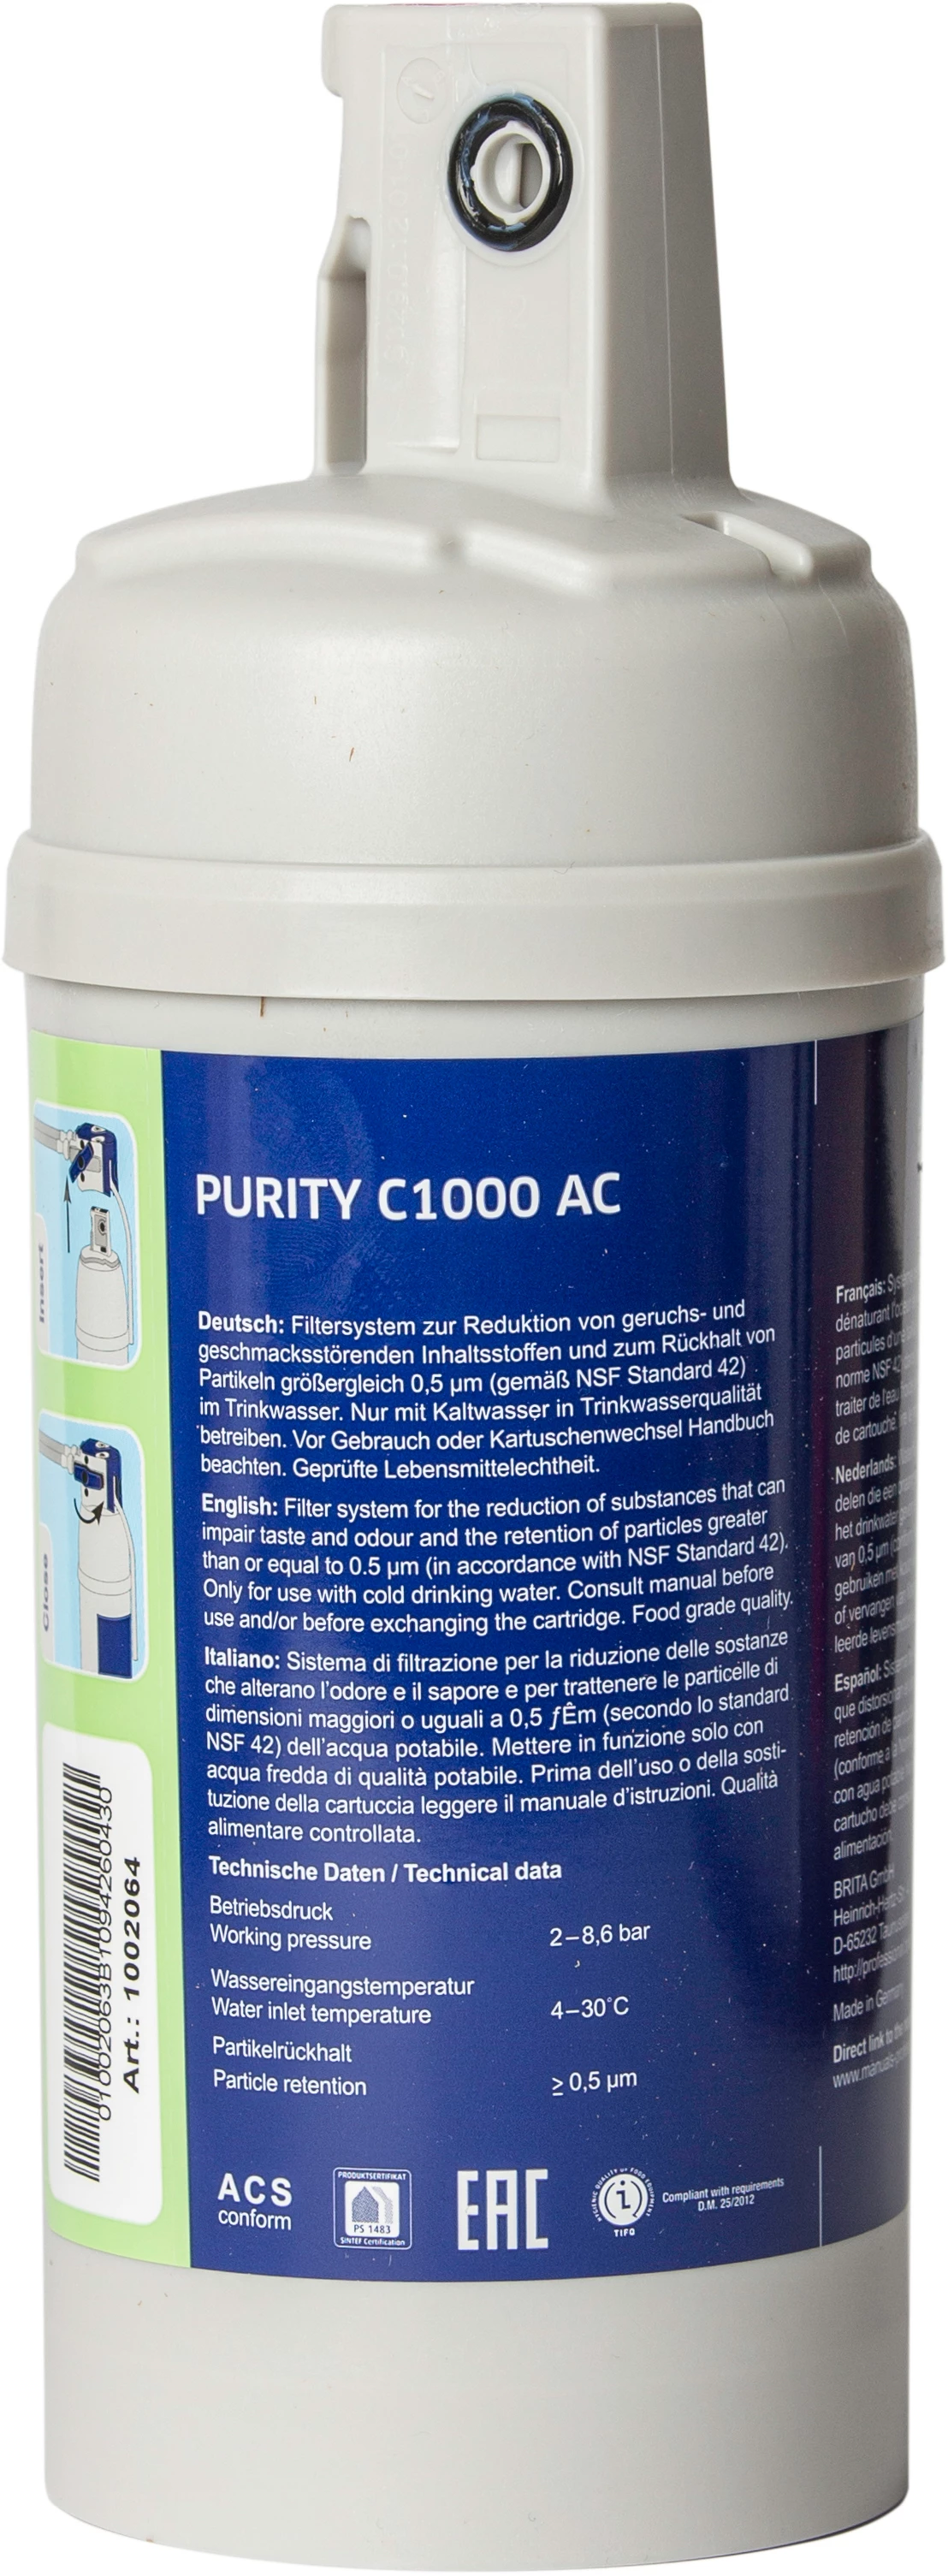 Air Consult Purity C1000 AC refill-filter